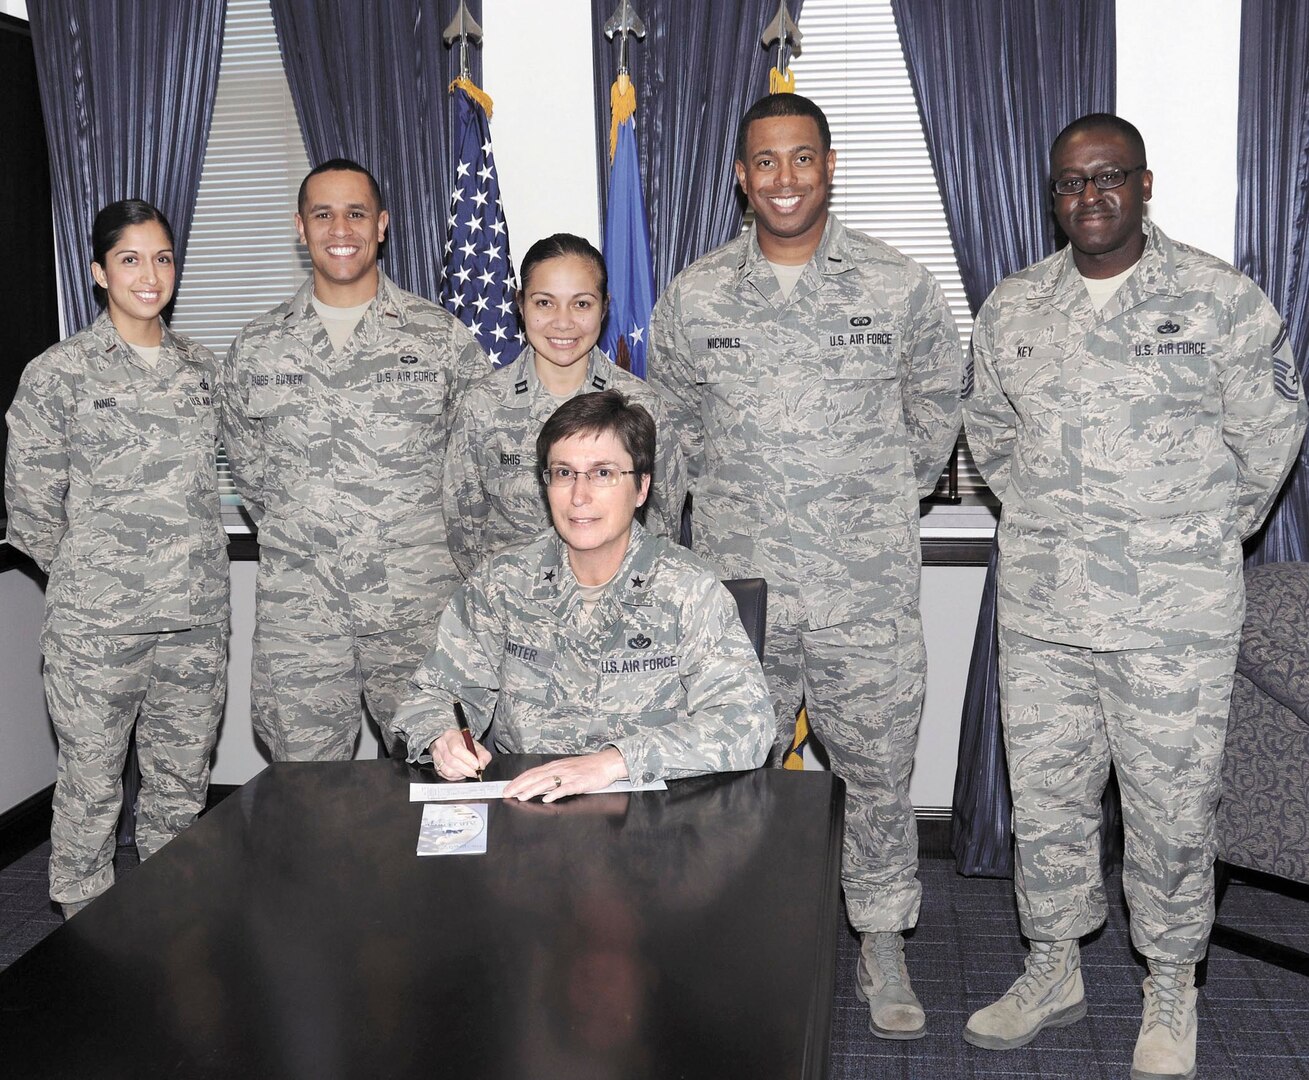 Brig. Gen. Theresa C. Carter, center, Joint Base San Antonio and 502nd Air Base Wing commander, signs her Air Force Assistance Fund pledge at the wing headquarters on JBSA-Fort Sam Houston Tuesday. The general is joined by JBSA AFAF Campaign leads, from left, 2nd Lt. Yuri Innis, 2nd Lt. Alexander Babbs-Butler, Capt. Celestine Lukshis, 1st Lt. Ryan Nichols and Senior Master Sgt. Patrick Key. The AFAF raises funds for four charitable affiliates that provide support to Air Force family members in need: Air Force Villages, Inc.; Air Force Aid Society, Inc.; the Gen. and Mrs. Curtis E. LeMay Foundation and Air Force Enlisted Village, Inc. (U.S. Air Force photo by Joel Martinez/Released)